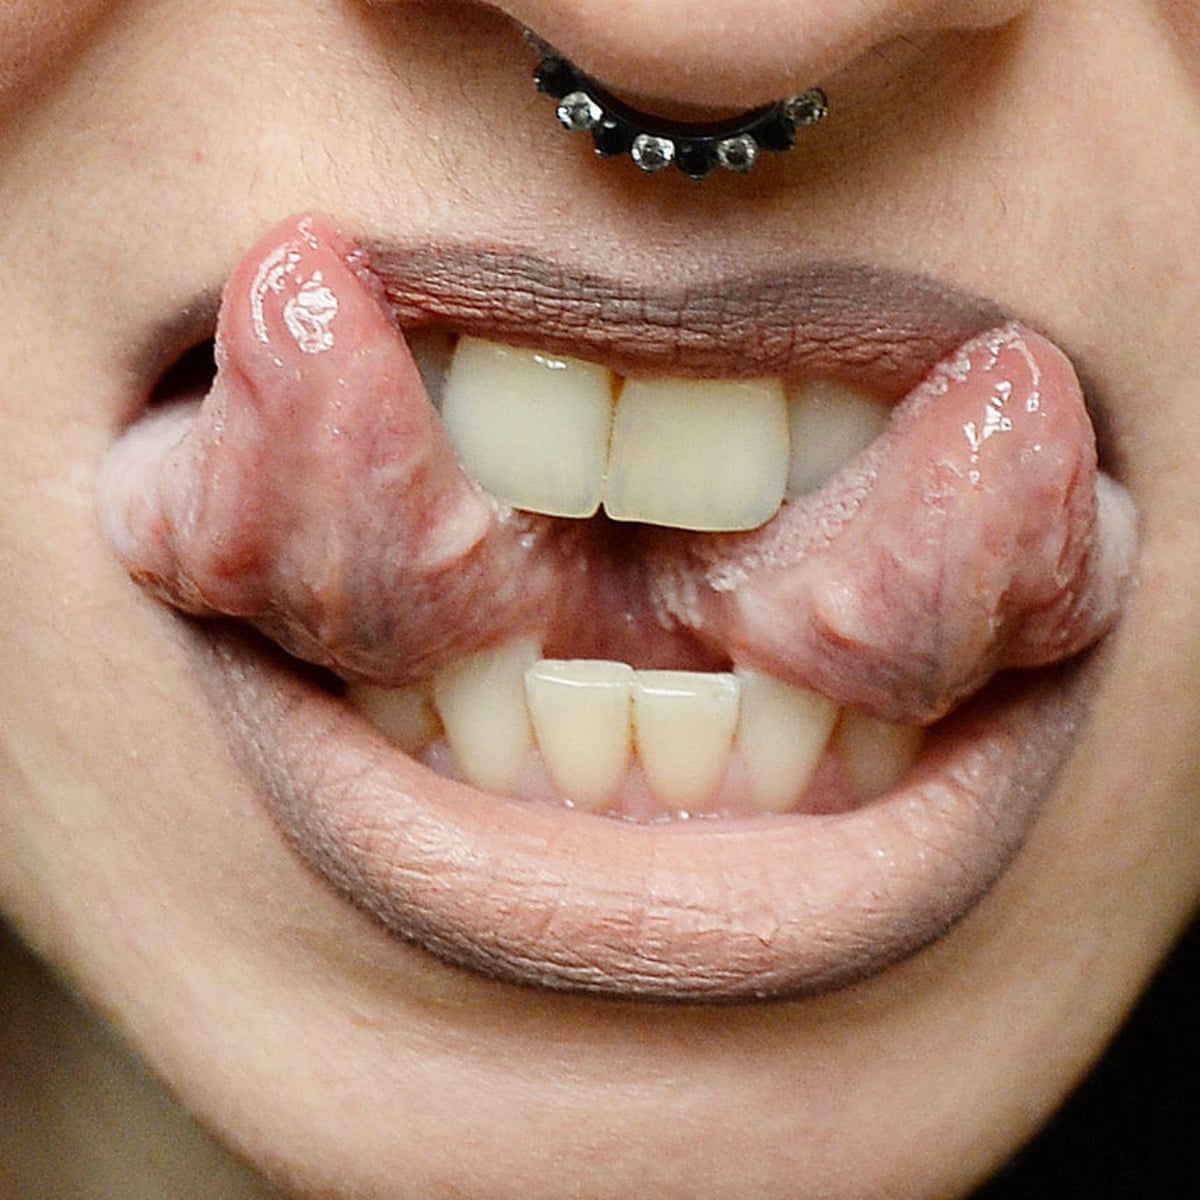 Meaning of tongue ring